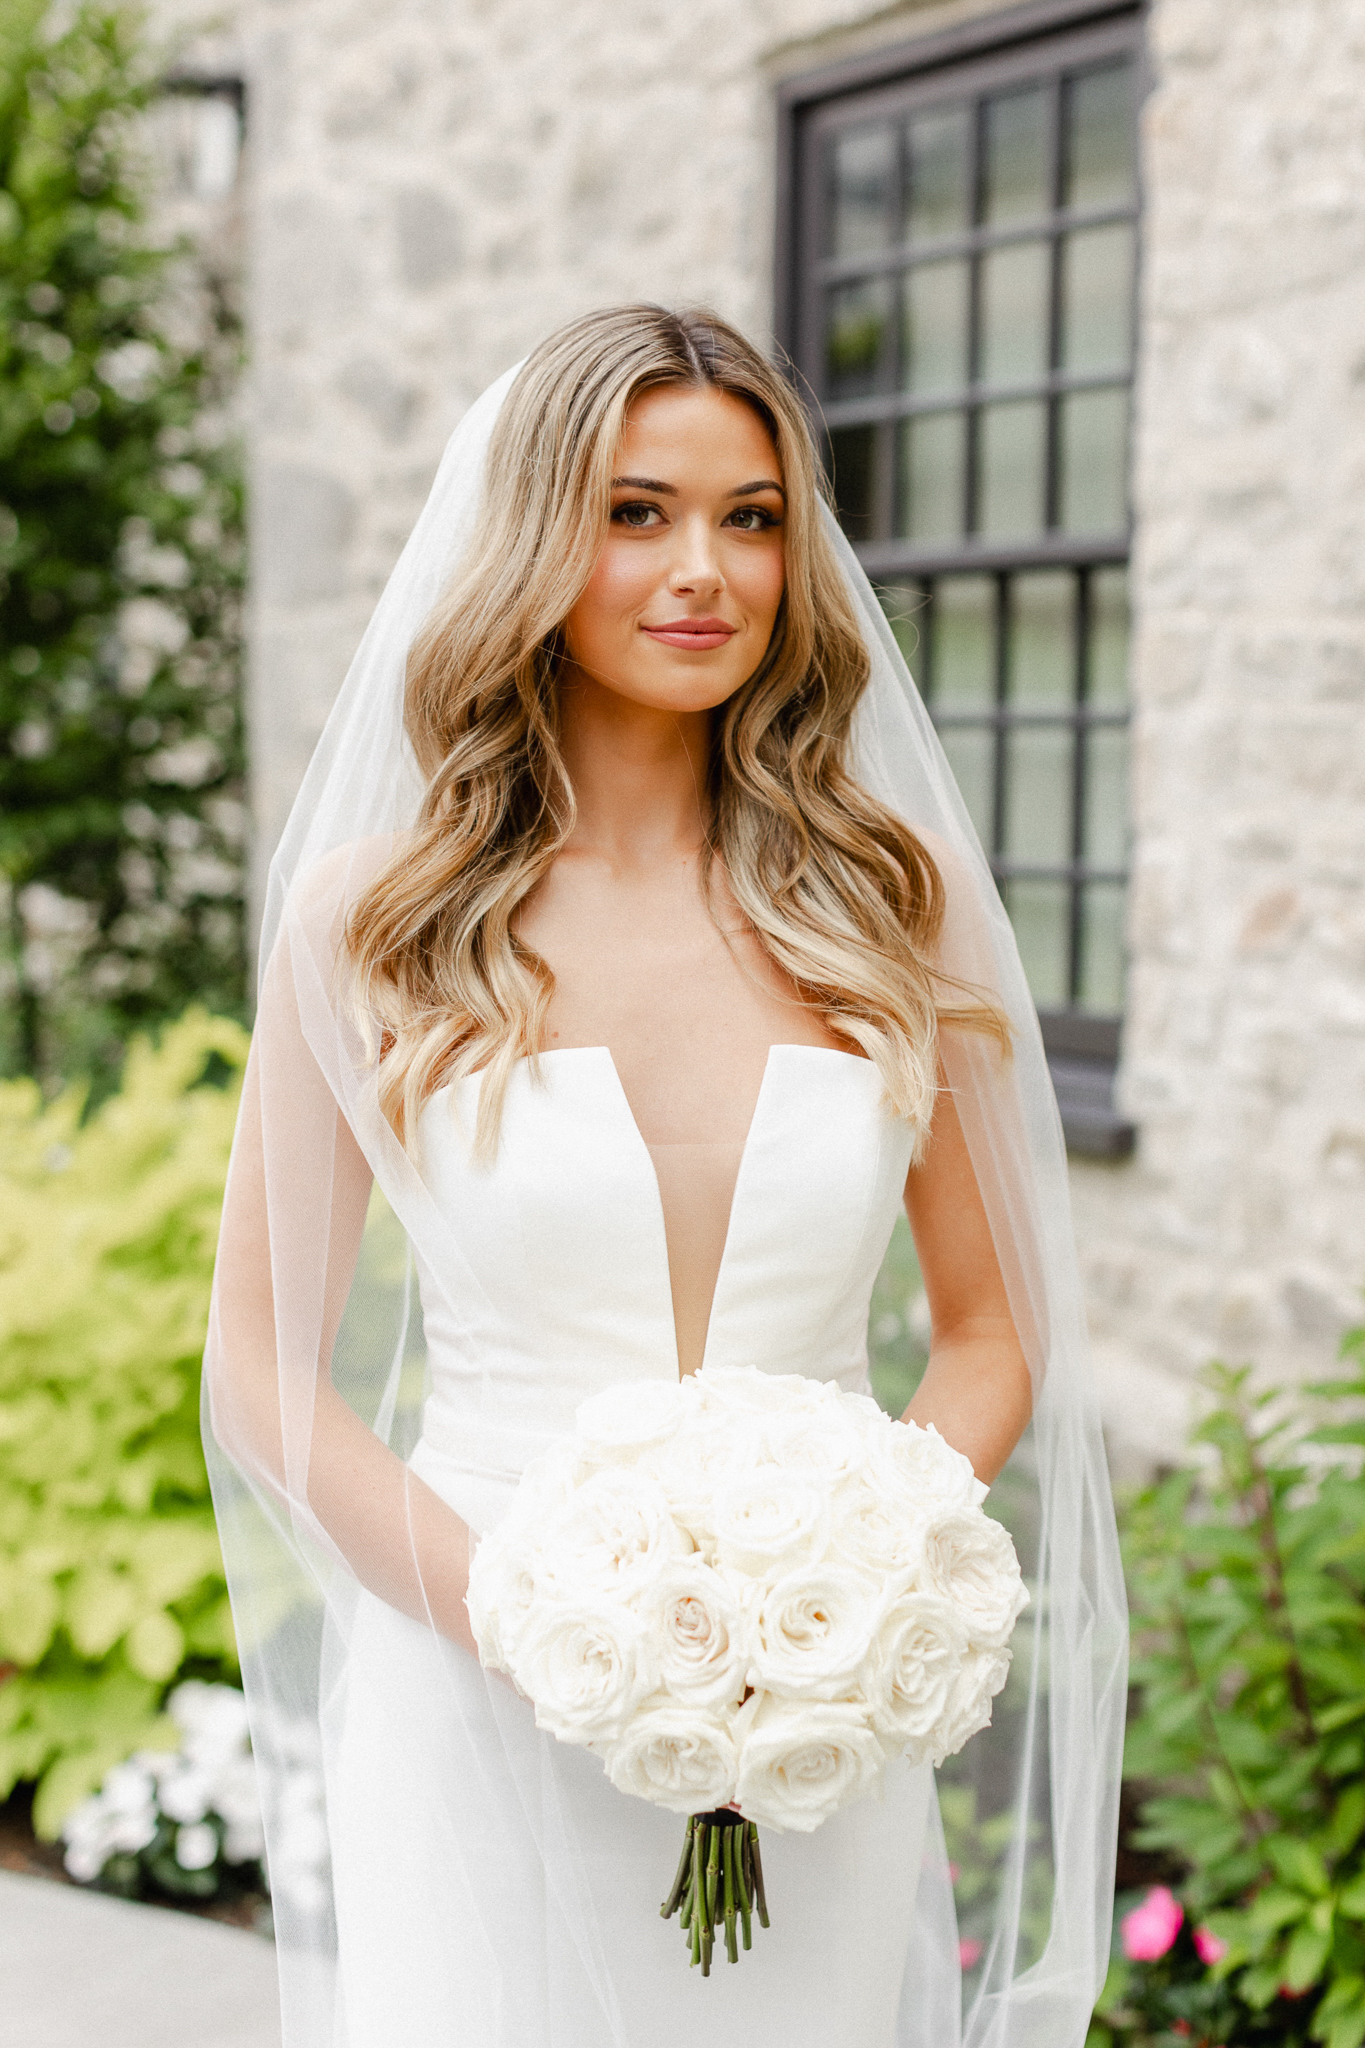 A stunning bride, elegantly dressed in white, gracefully holds a bouquet in this captivating bridal portrait.